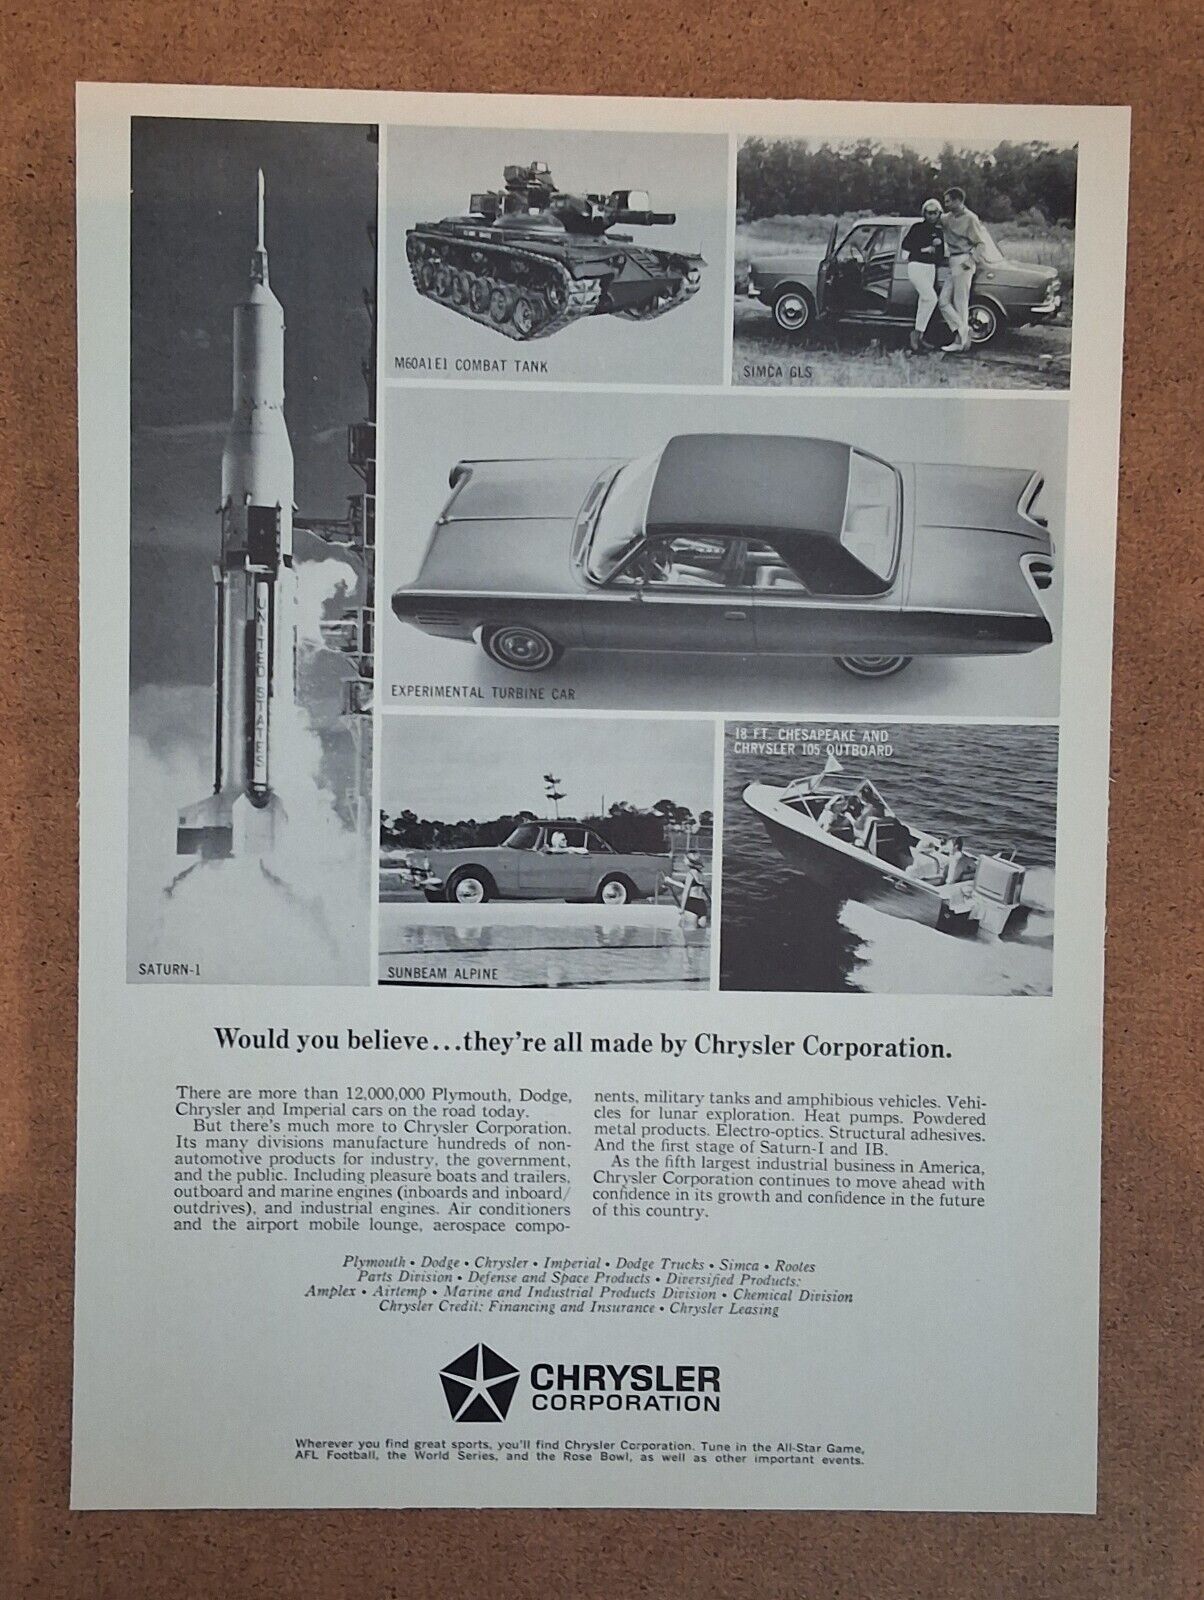 Vintage Would You Believe They Are All Made By Chrysler Coporation - 1966 Art AD